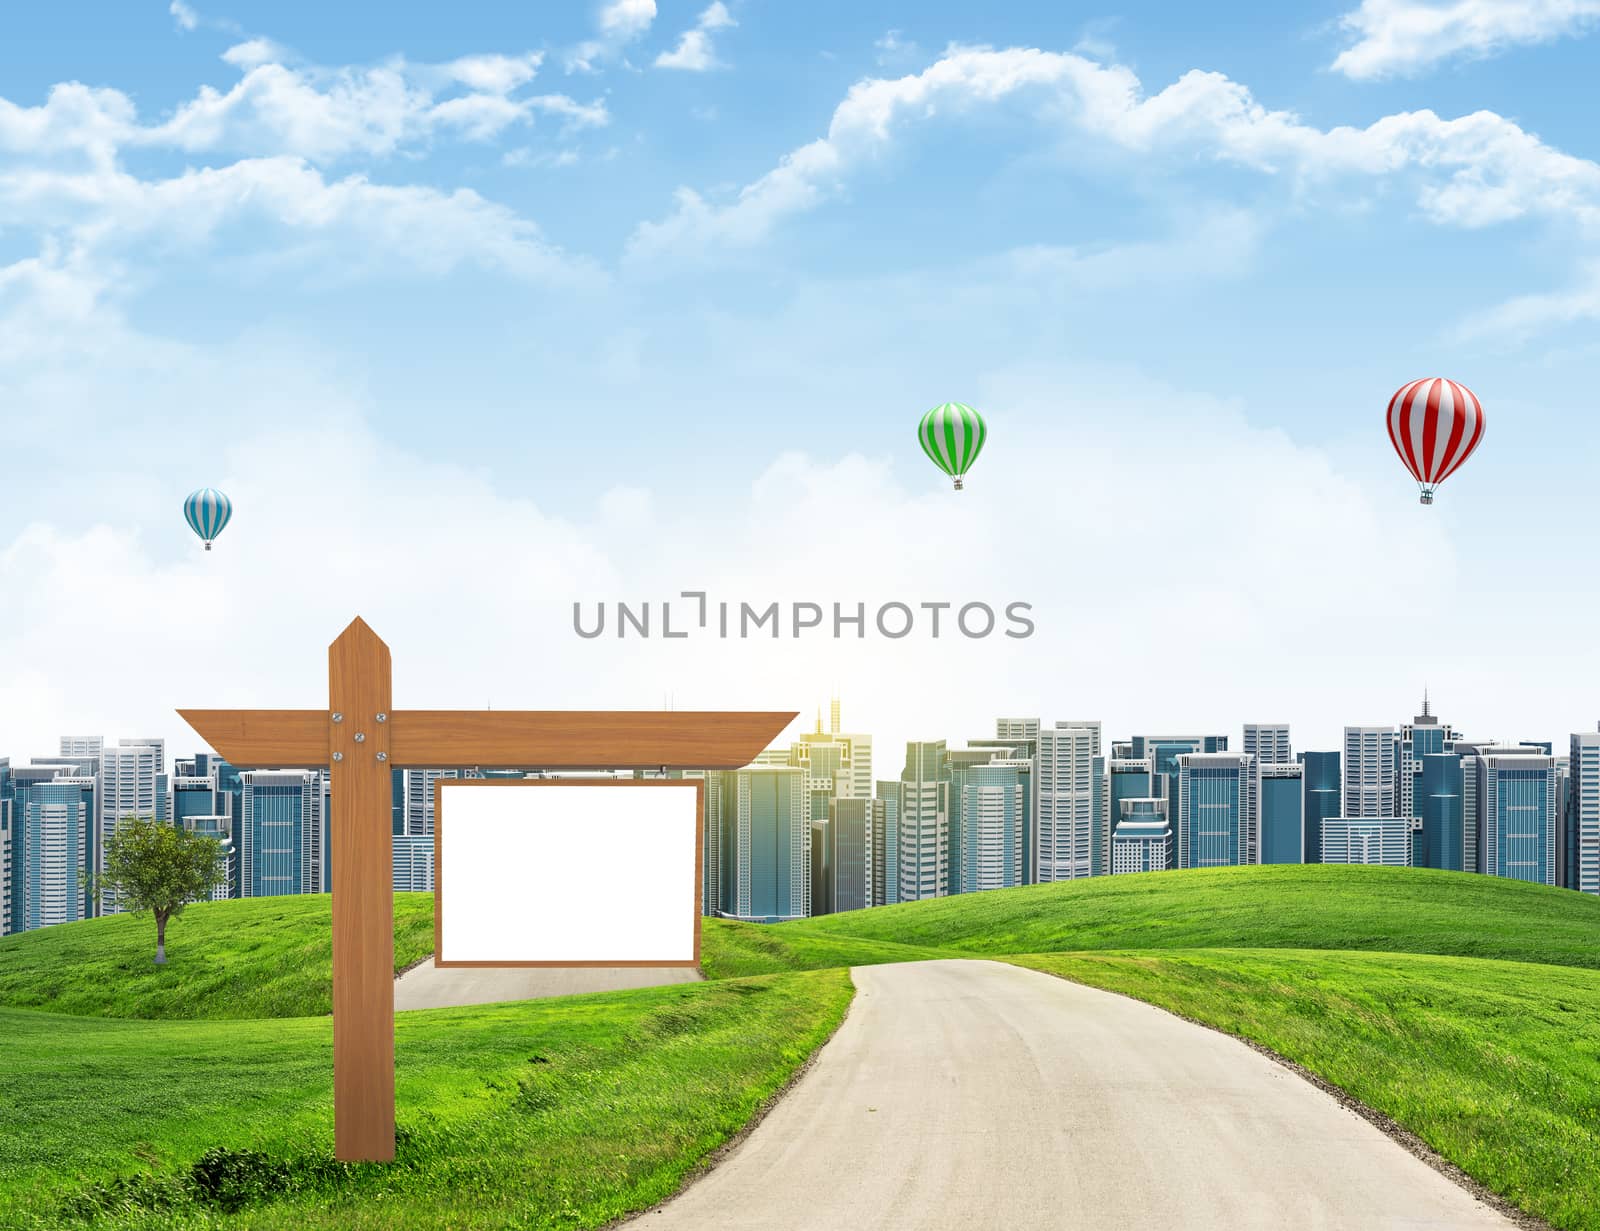 Tall buildings, green hills and road with wooden signboard against sky with clouds. Architectural concept